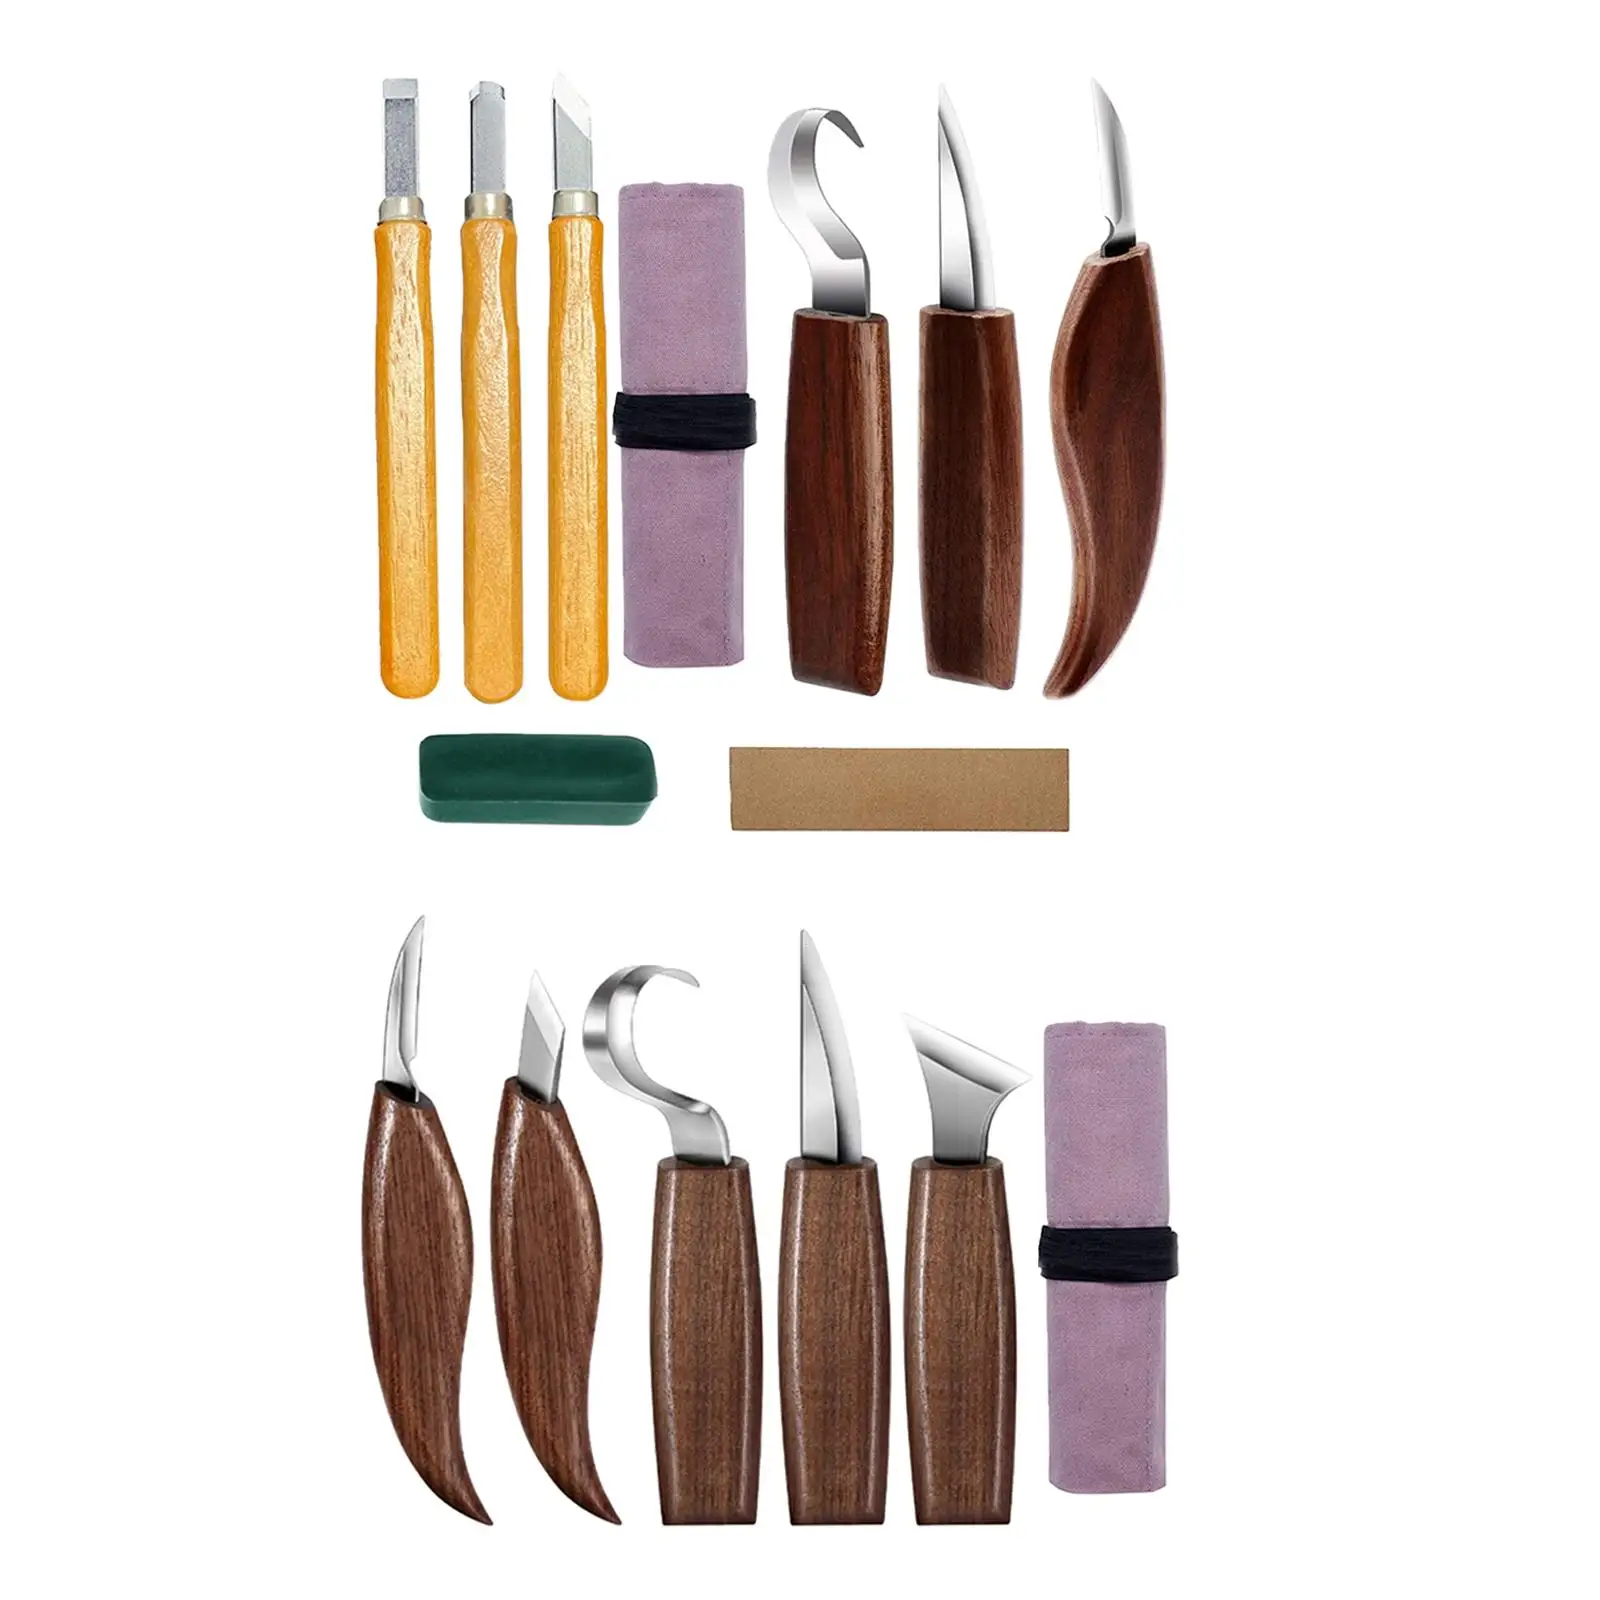 Premium Wood Carving Tools Set Woodworking Cutter Hook Carving Knife Hand Tool Crafts Detail Cutter DIY Carpentry Kids Adults